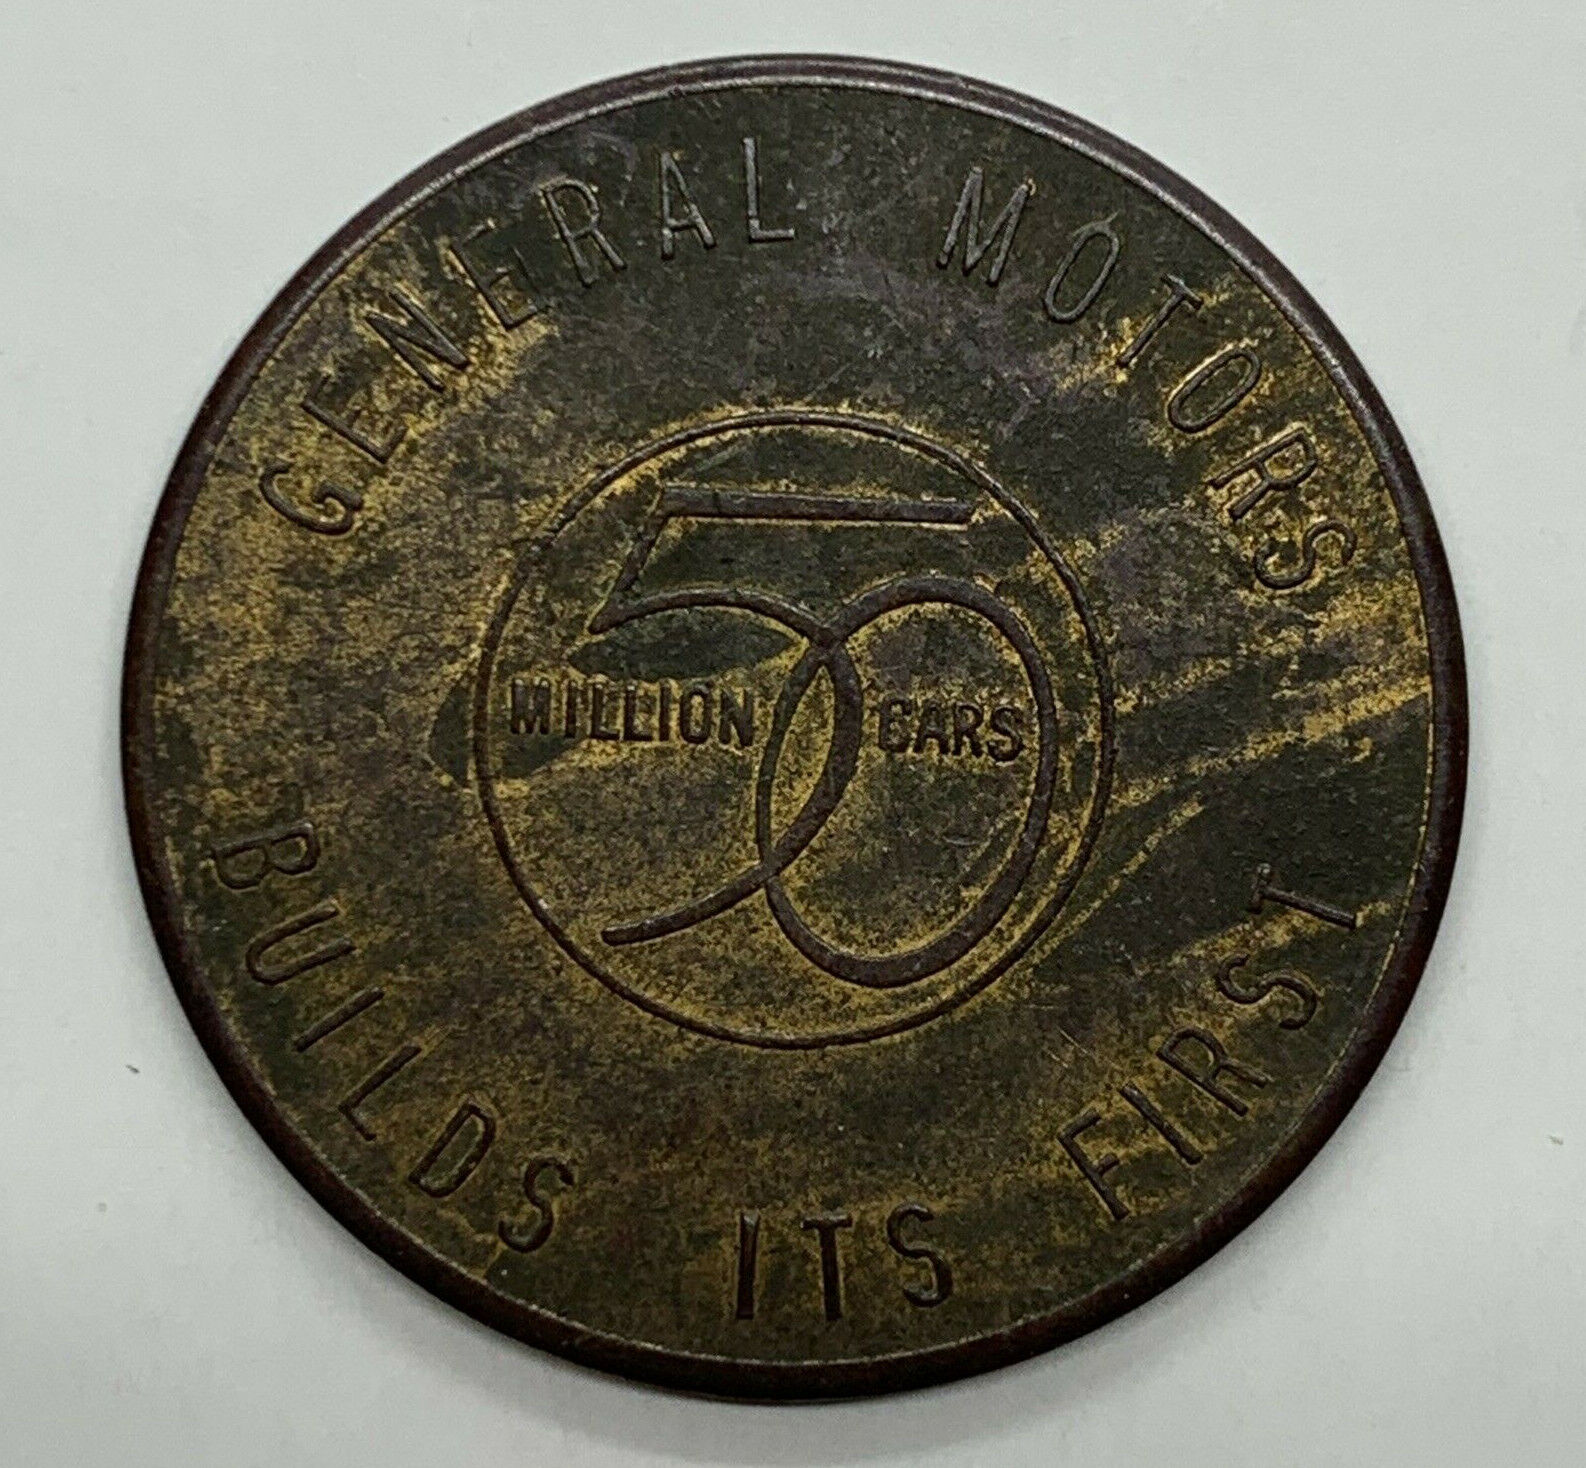 1954 GENERAL MOTORS 50 MILLION CARS SOLD TOKEN BODY BY FISHER PROMOTIONAL COIN